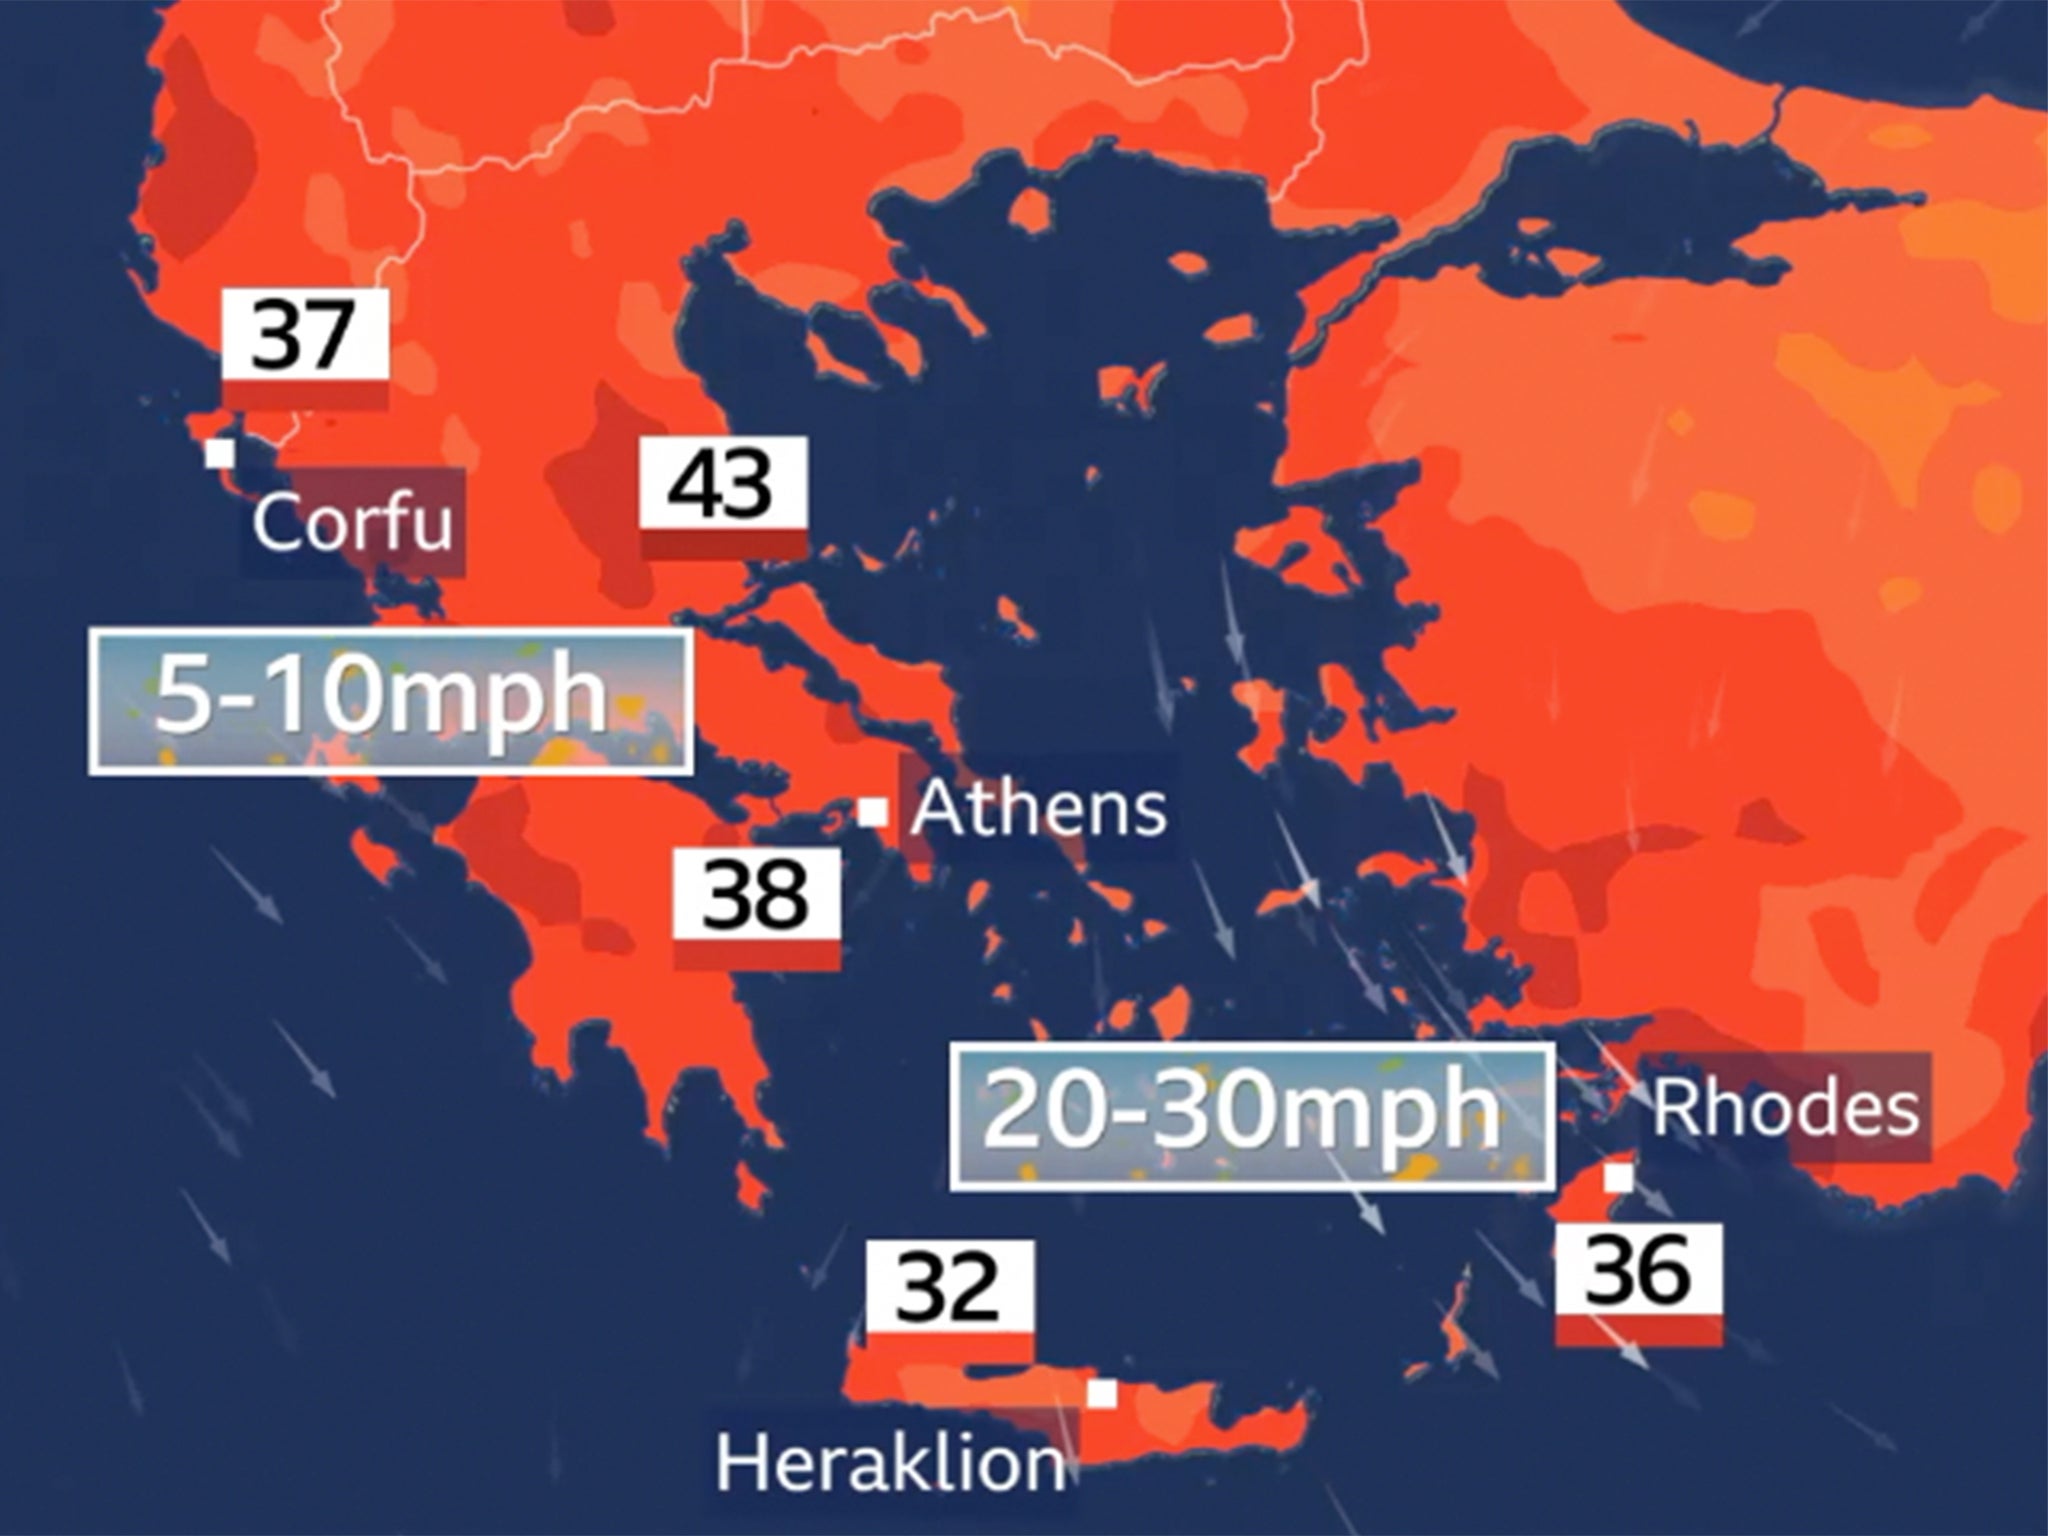 Greece has seen record temperatures this month